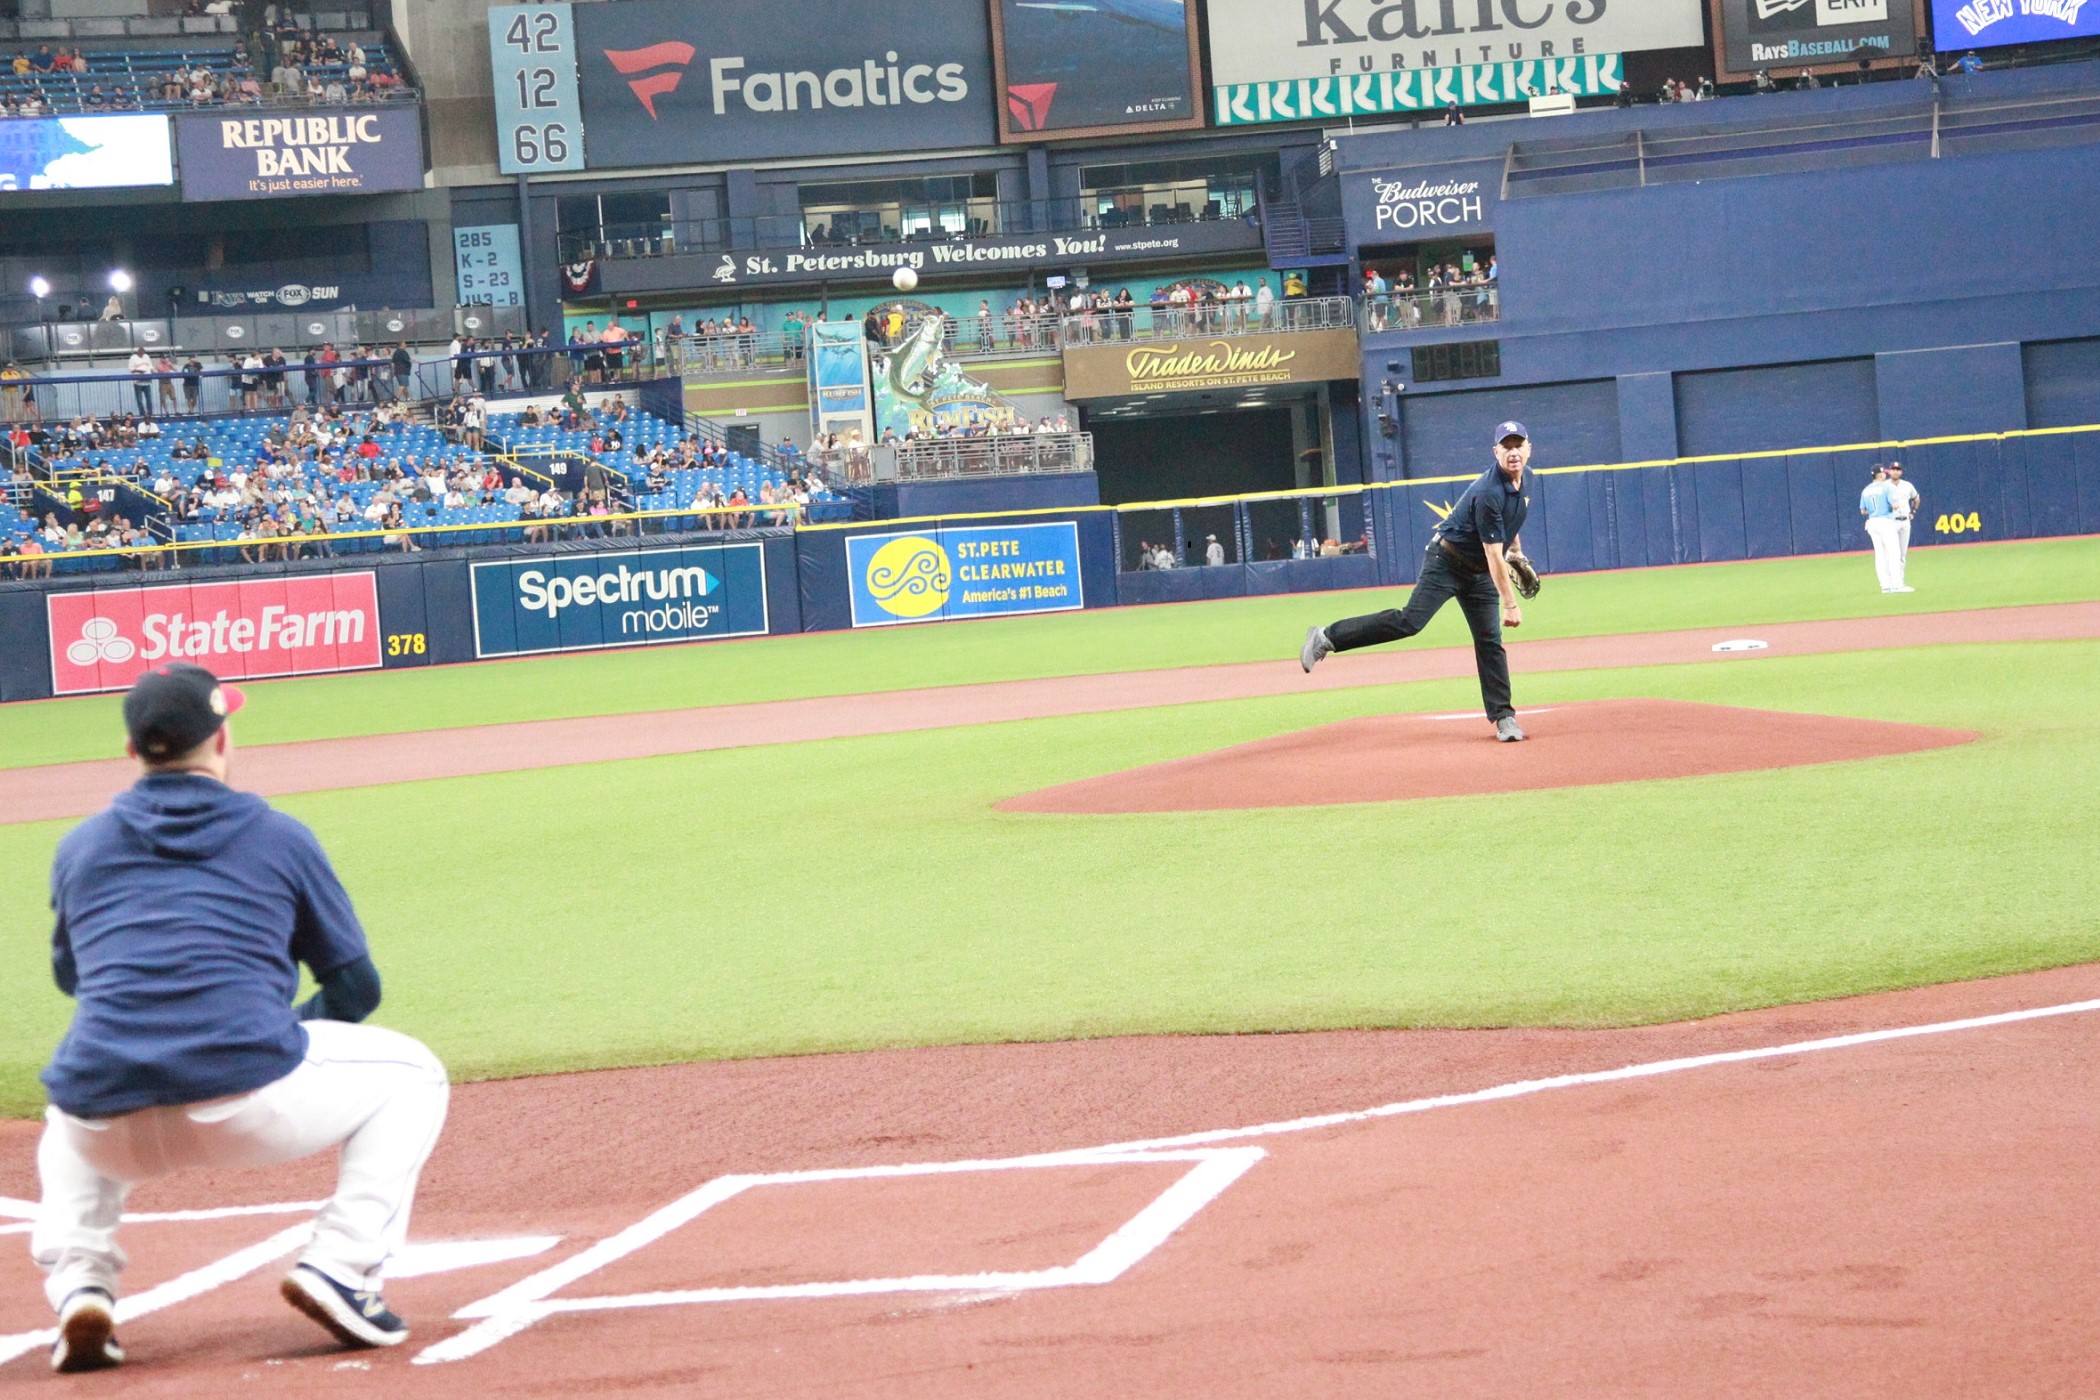 Crown Automotive Group President and COO Jim Myers throws out the Ceremonial First Pitch at the Tampa Bay Rays game on July 7, 2019.